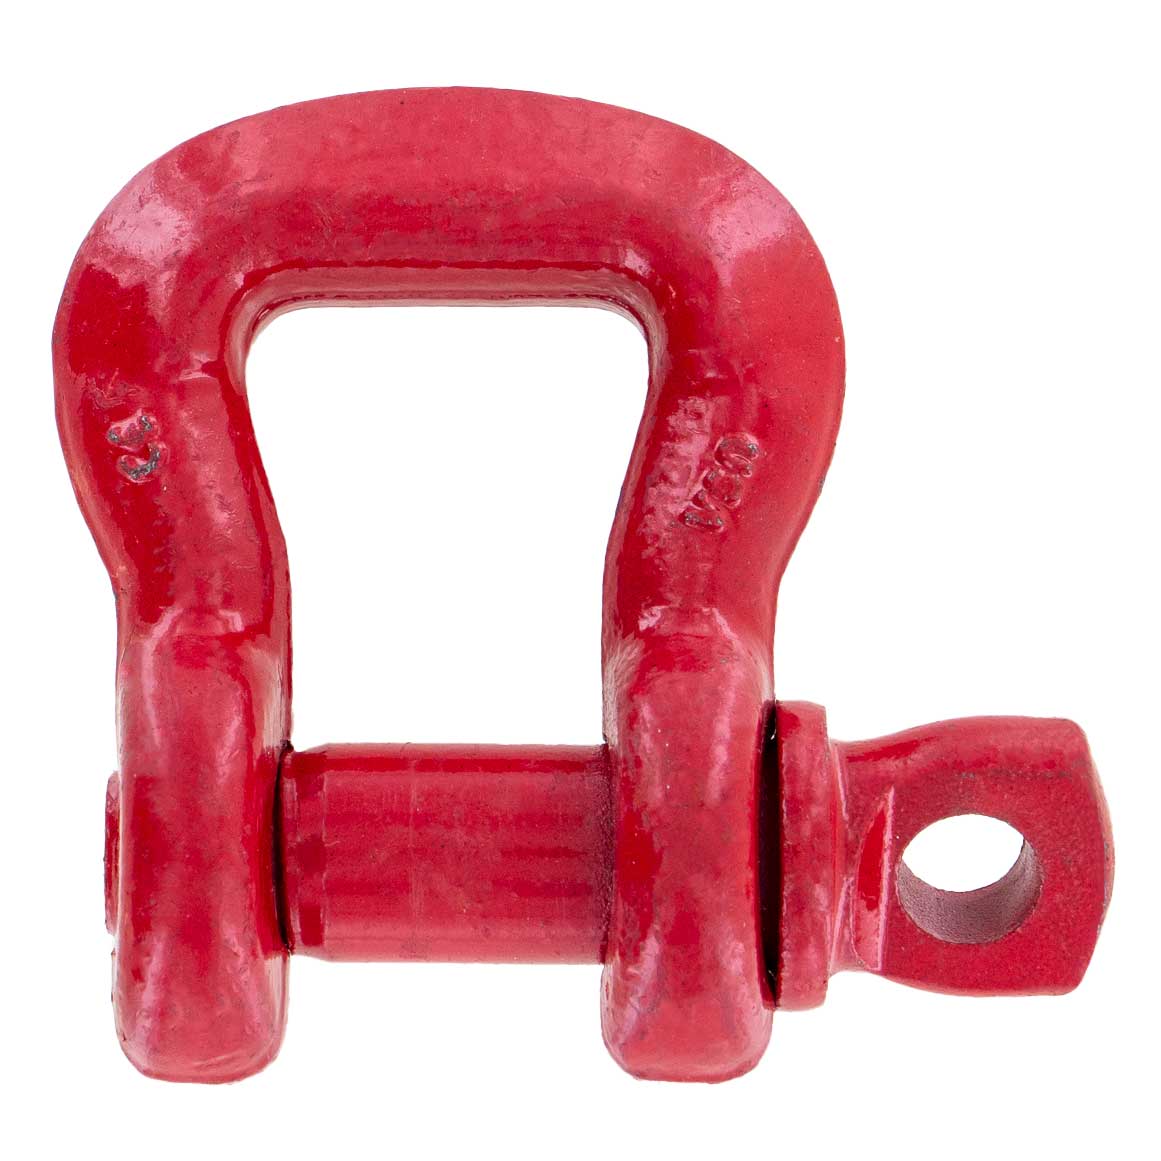 Crosby® Screw Pin Sling Saver Shackle | S-253 - 4"- 20.5 Ton primary image